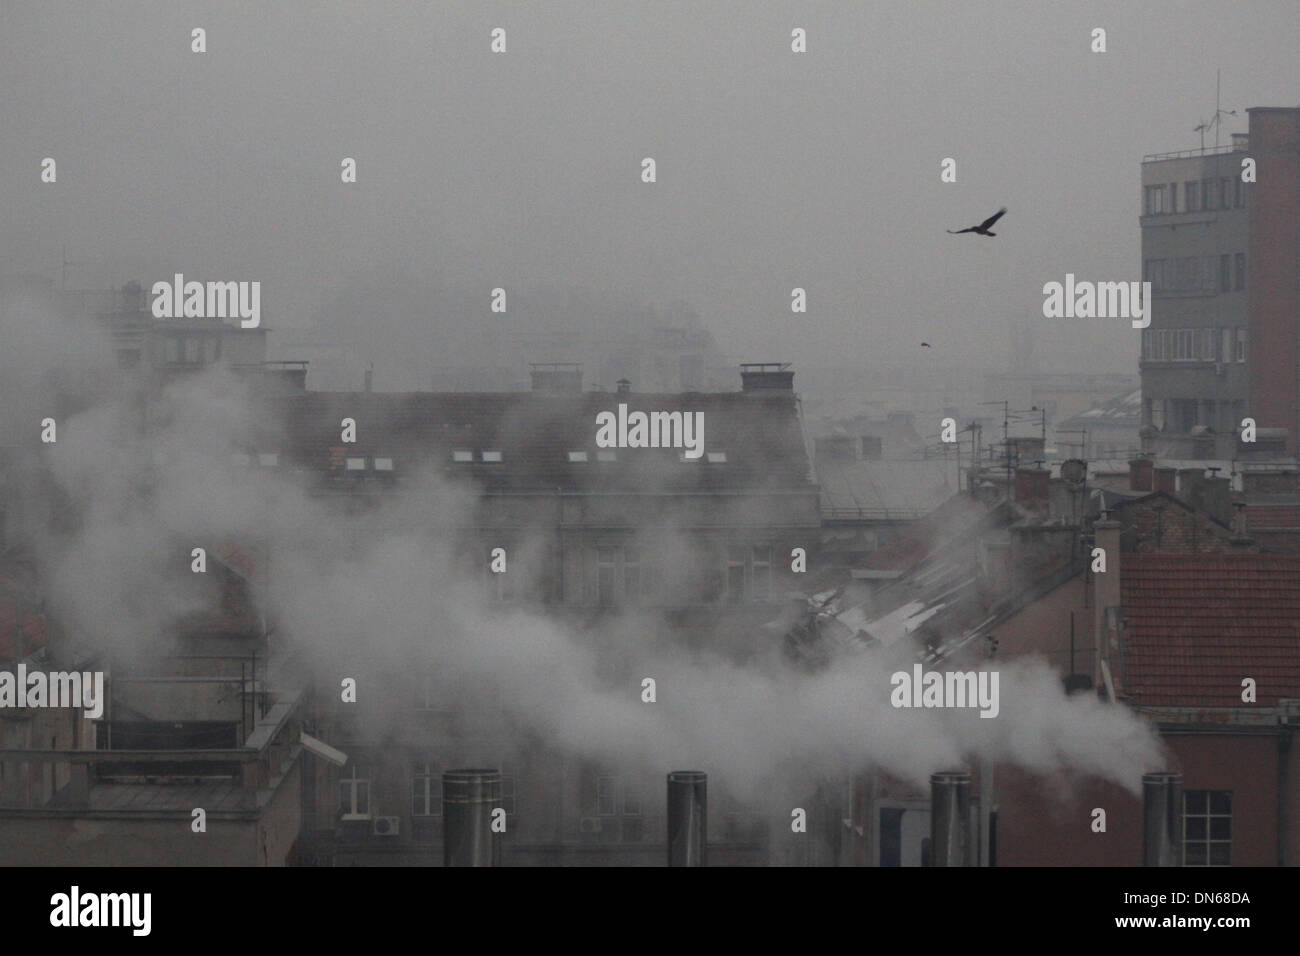 Sarajevo, Bosnia and Herzegovina. 19th Dec, 2013. A bird flies in the heavy smog in Sarajevo, capital of Bosnia and Herzegovina, on Dec. 19, 2013. Air pollution in winter in Sarajevo became serious due to burning of coal and woods as well as the location of the city, which is surrounded by mountains. Credit:  Haris Memija/Xinhua/Alamy Live News Stock Photo